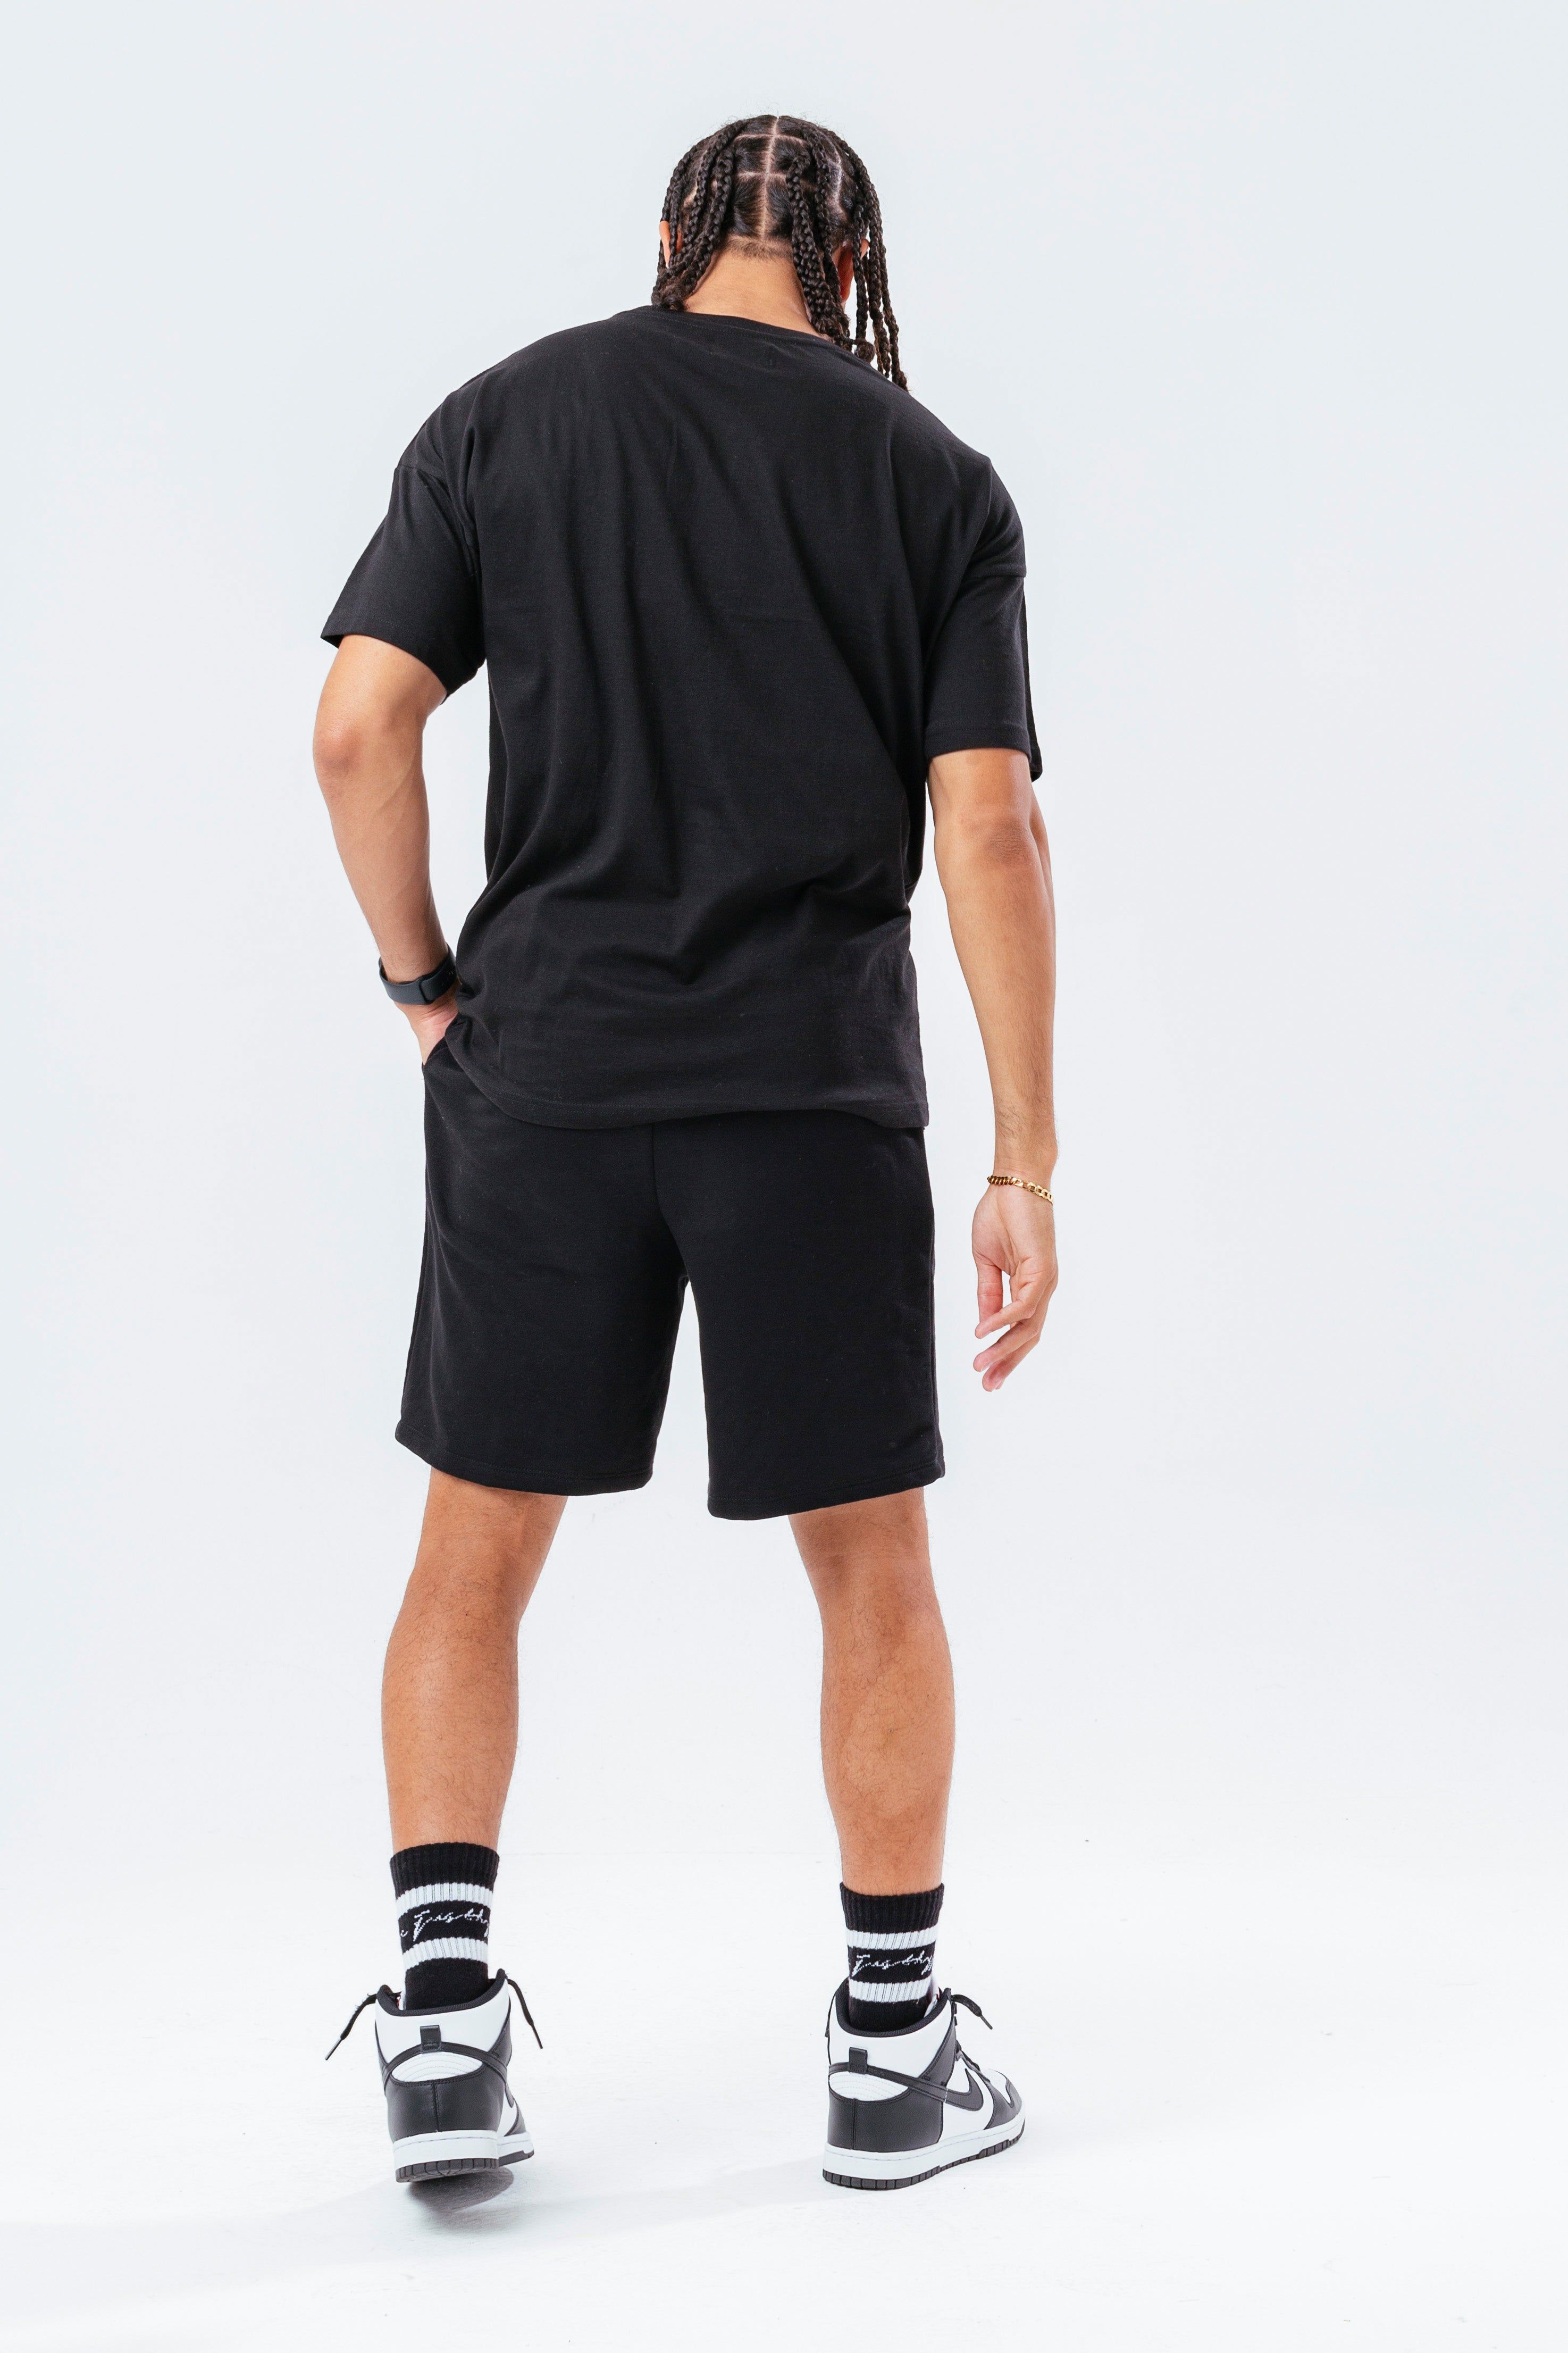 Make the most of your spending and stock up on our Men's 3-pack oversized t-shirts. Each tee is designed with a soft-touch fabric base for the ultimate comfort and breathable fabric. Highlighting an oversized shape, crew neckline and enlarged sleeves for a trending fit. Your everyday tees just got simpler. The model wears a size M. Machine washable.